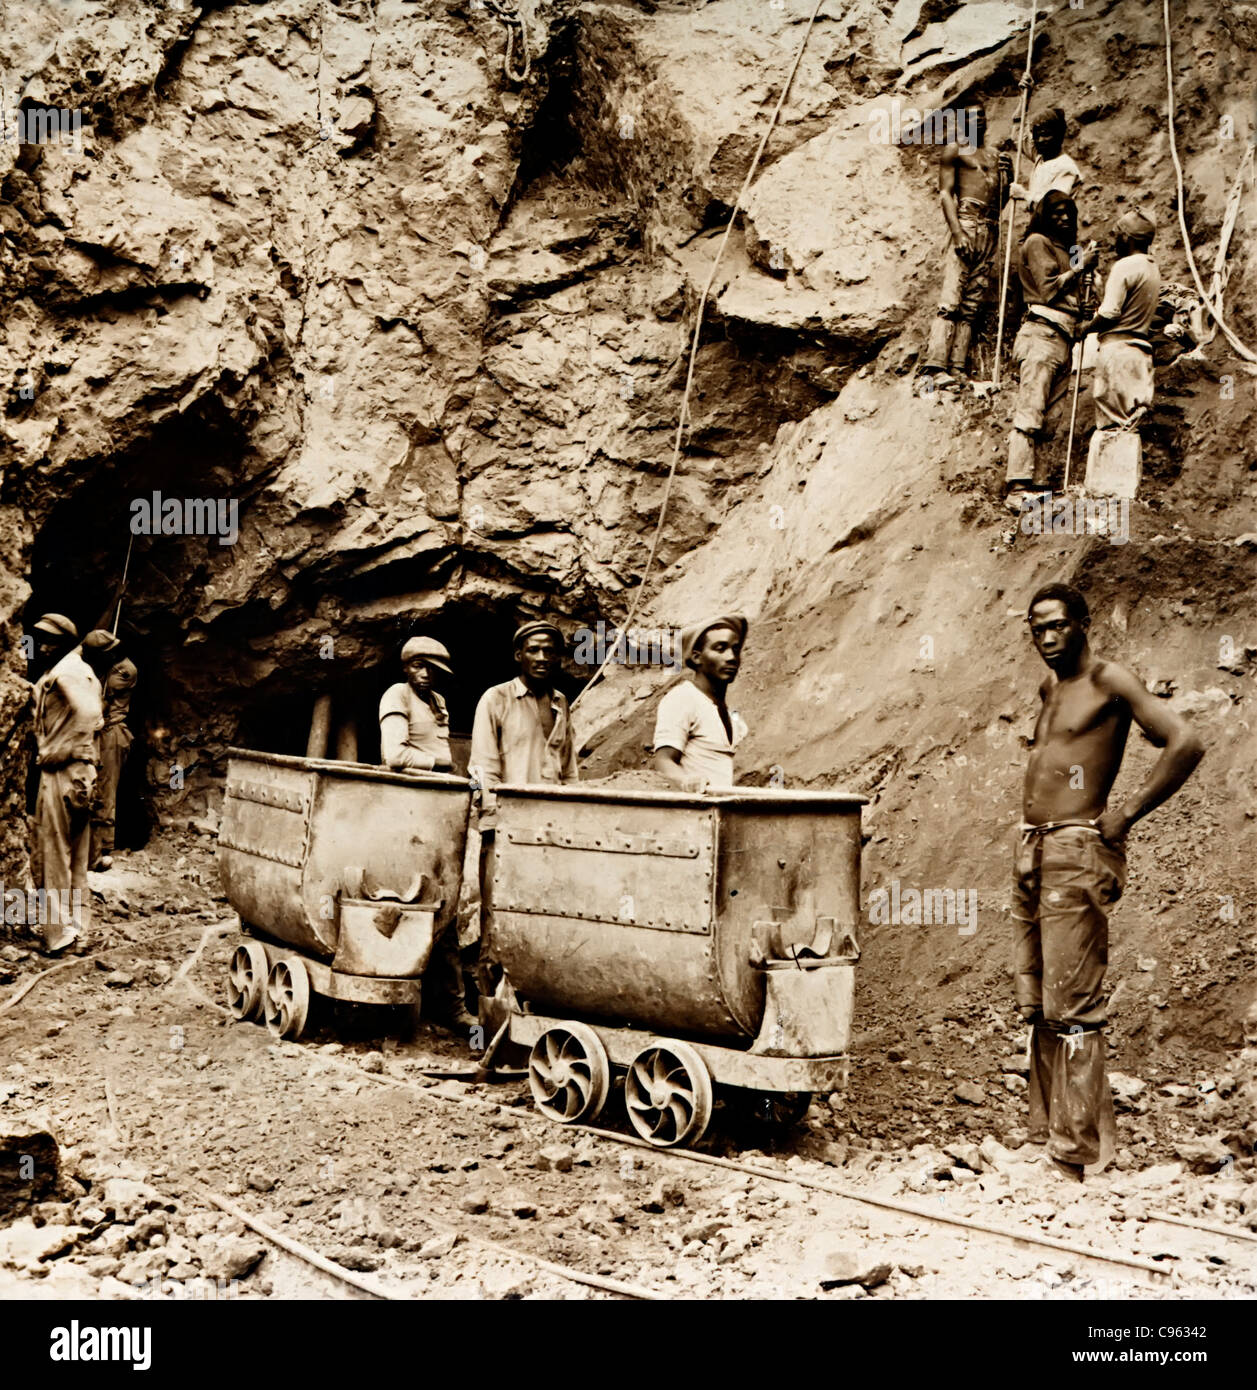 File:Cheque purchase Kimberley mine by de Beers.jpg - Wikipedia